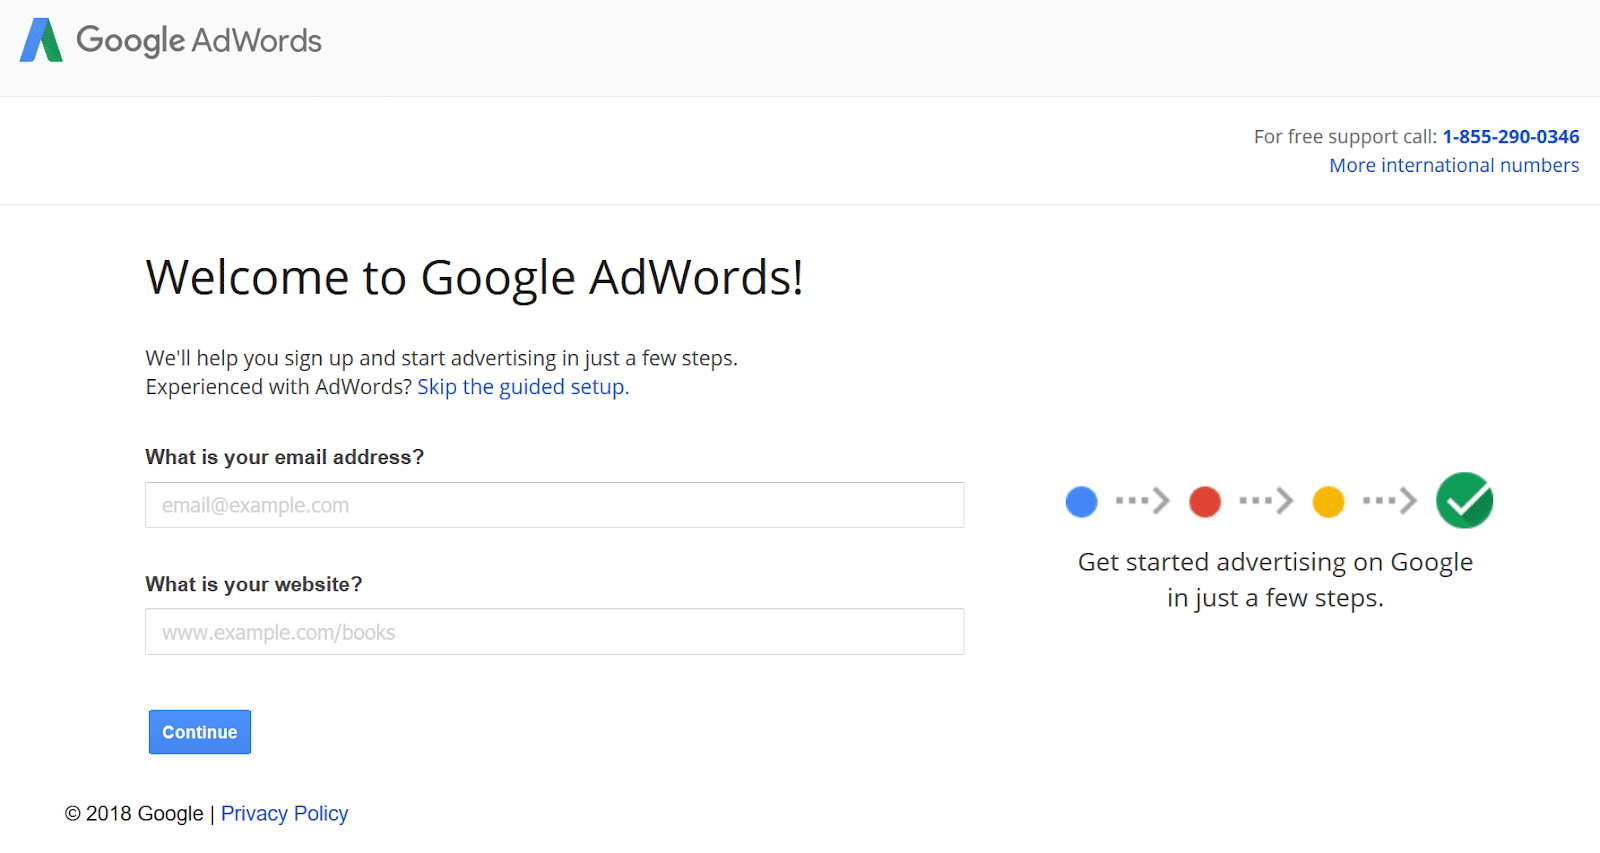 Sign up for Google AdWords